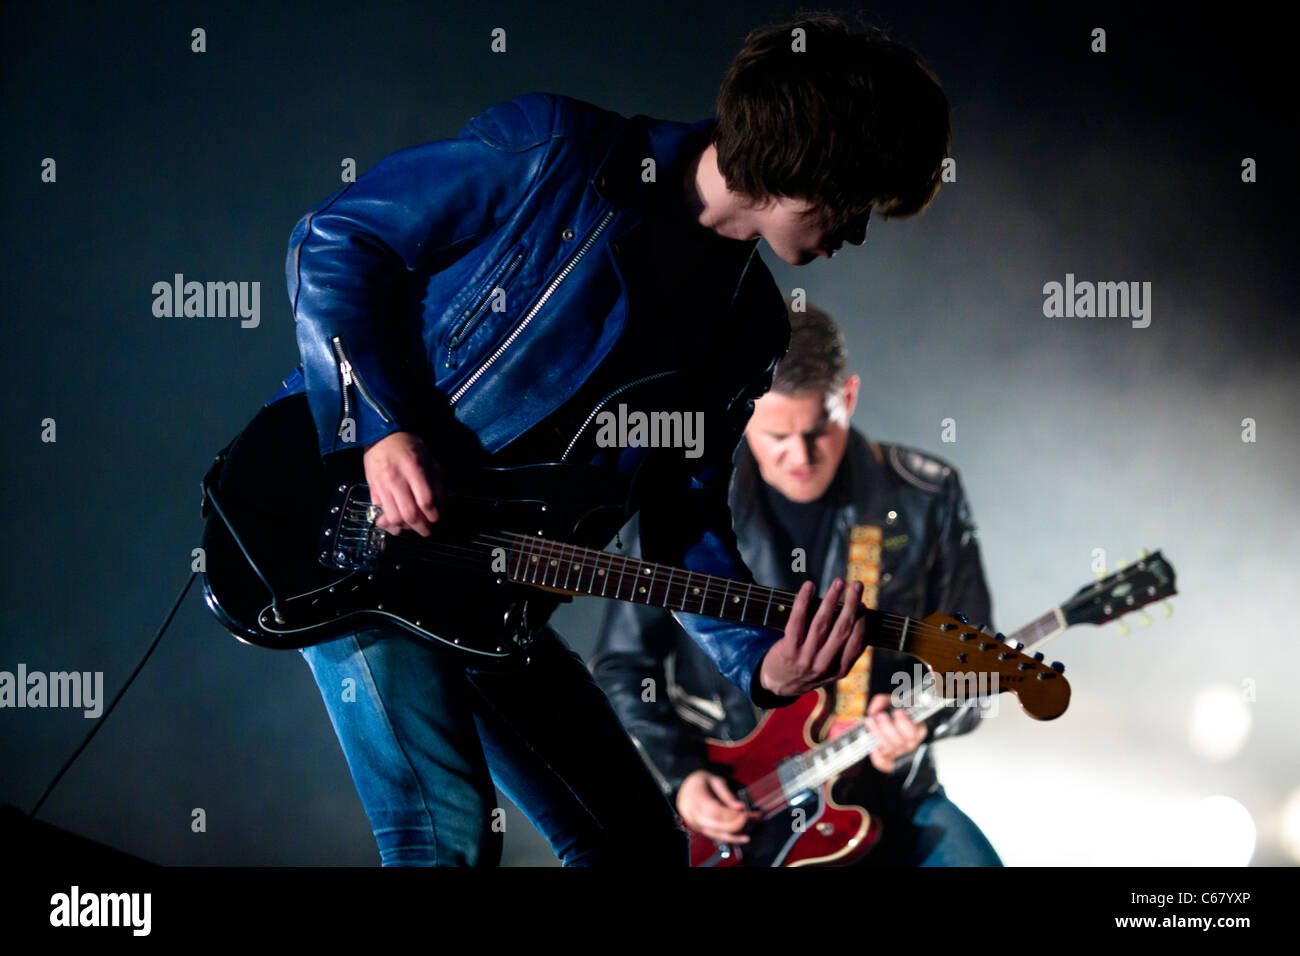 The Artic Monkeys guitarists playing live on stage at FIB Benicassim - july 2011 Stock Photo